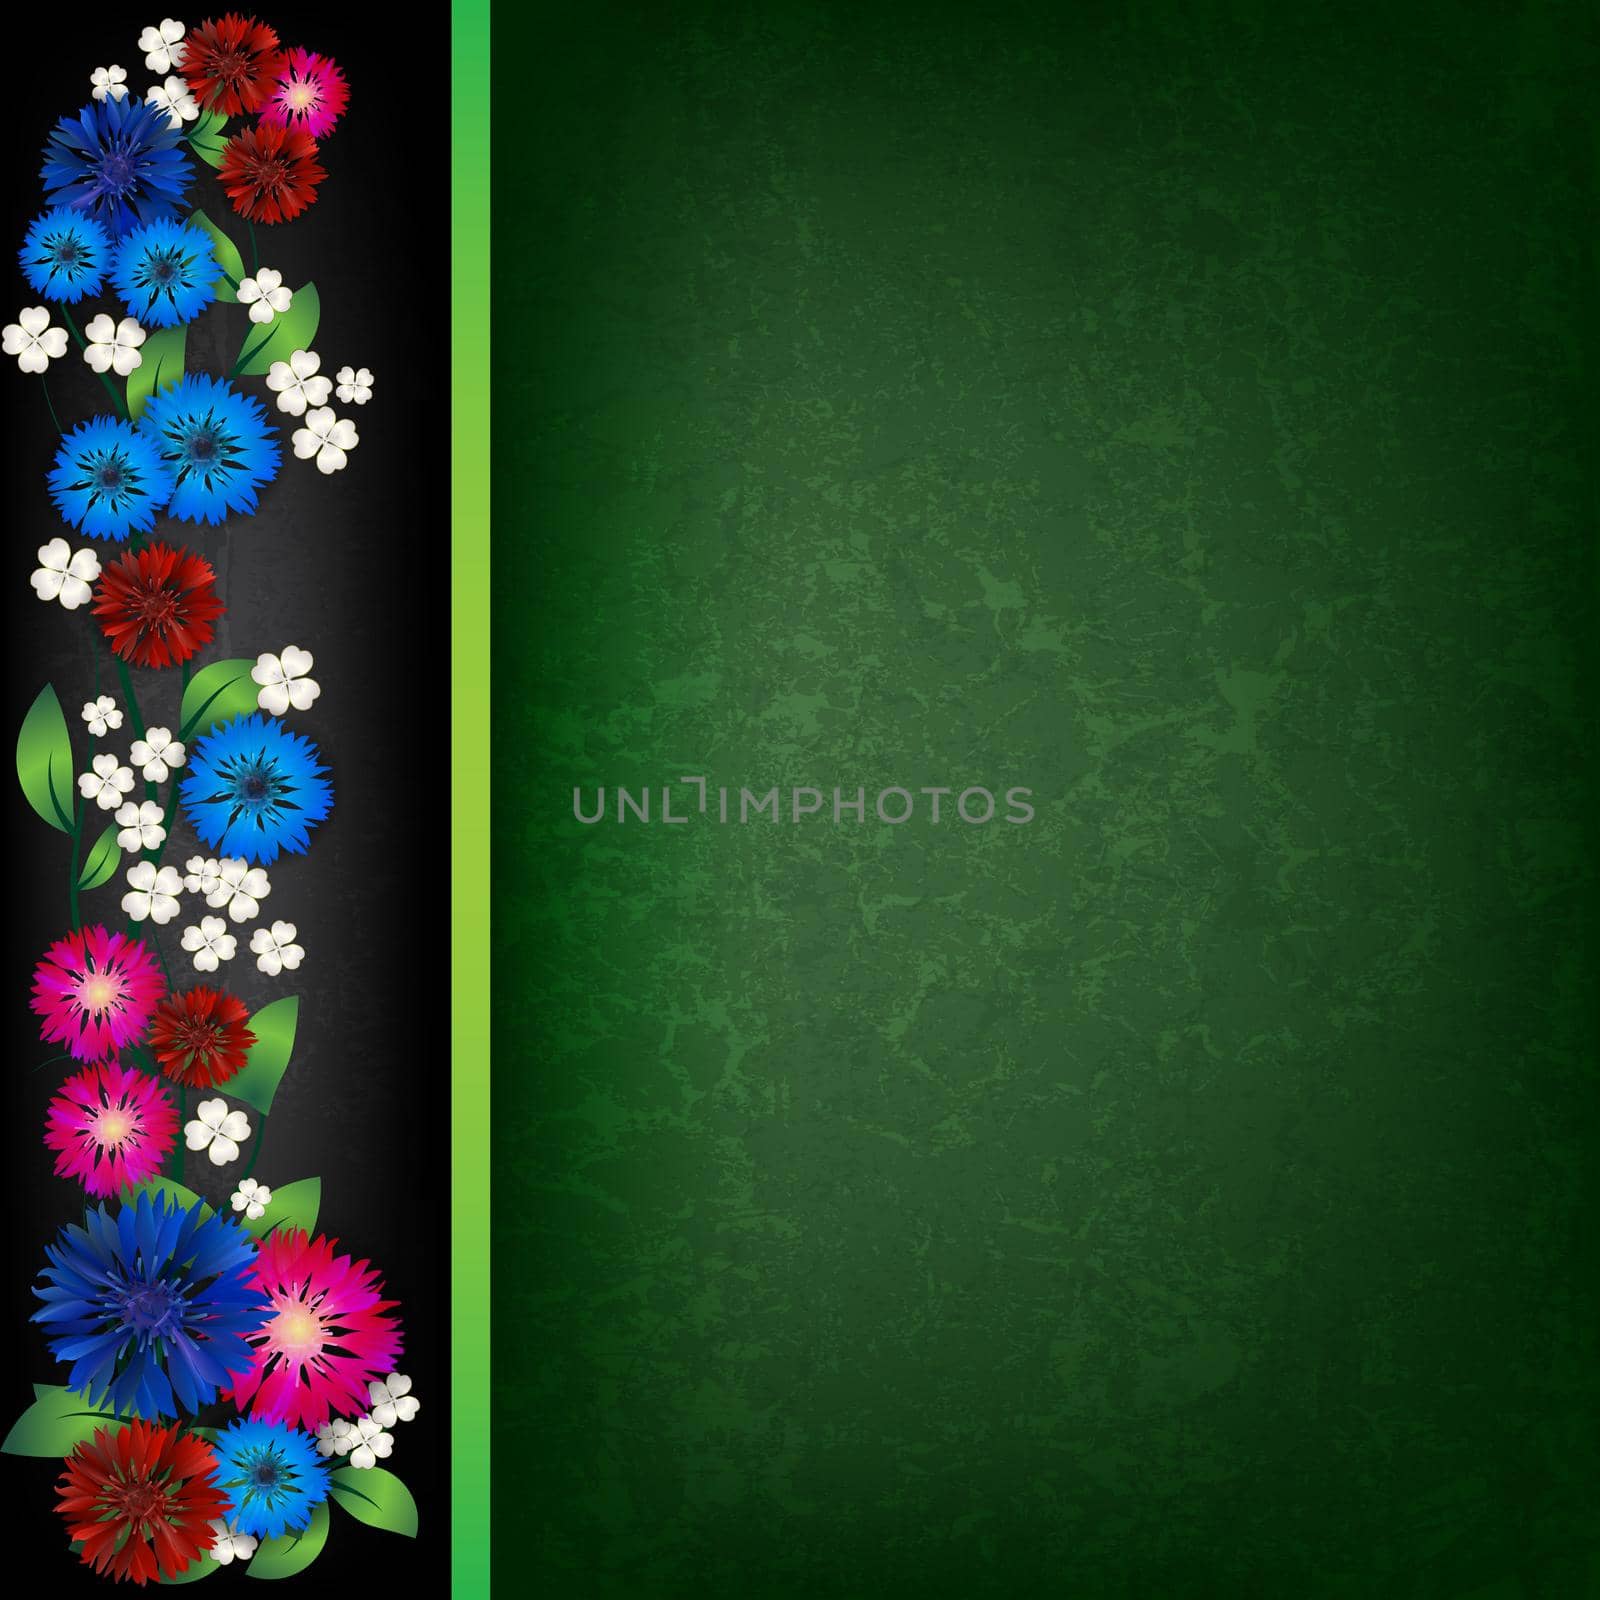 abstract green floral ornament with cornflowers on black background